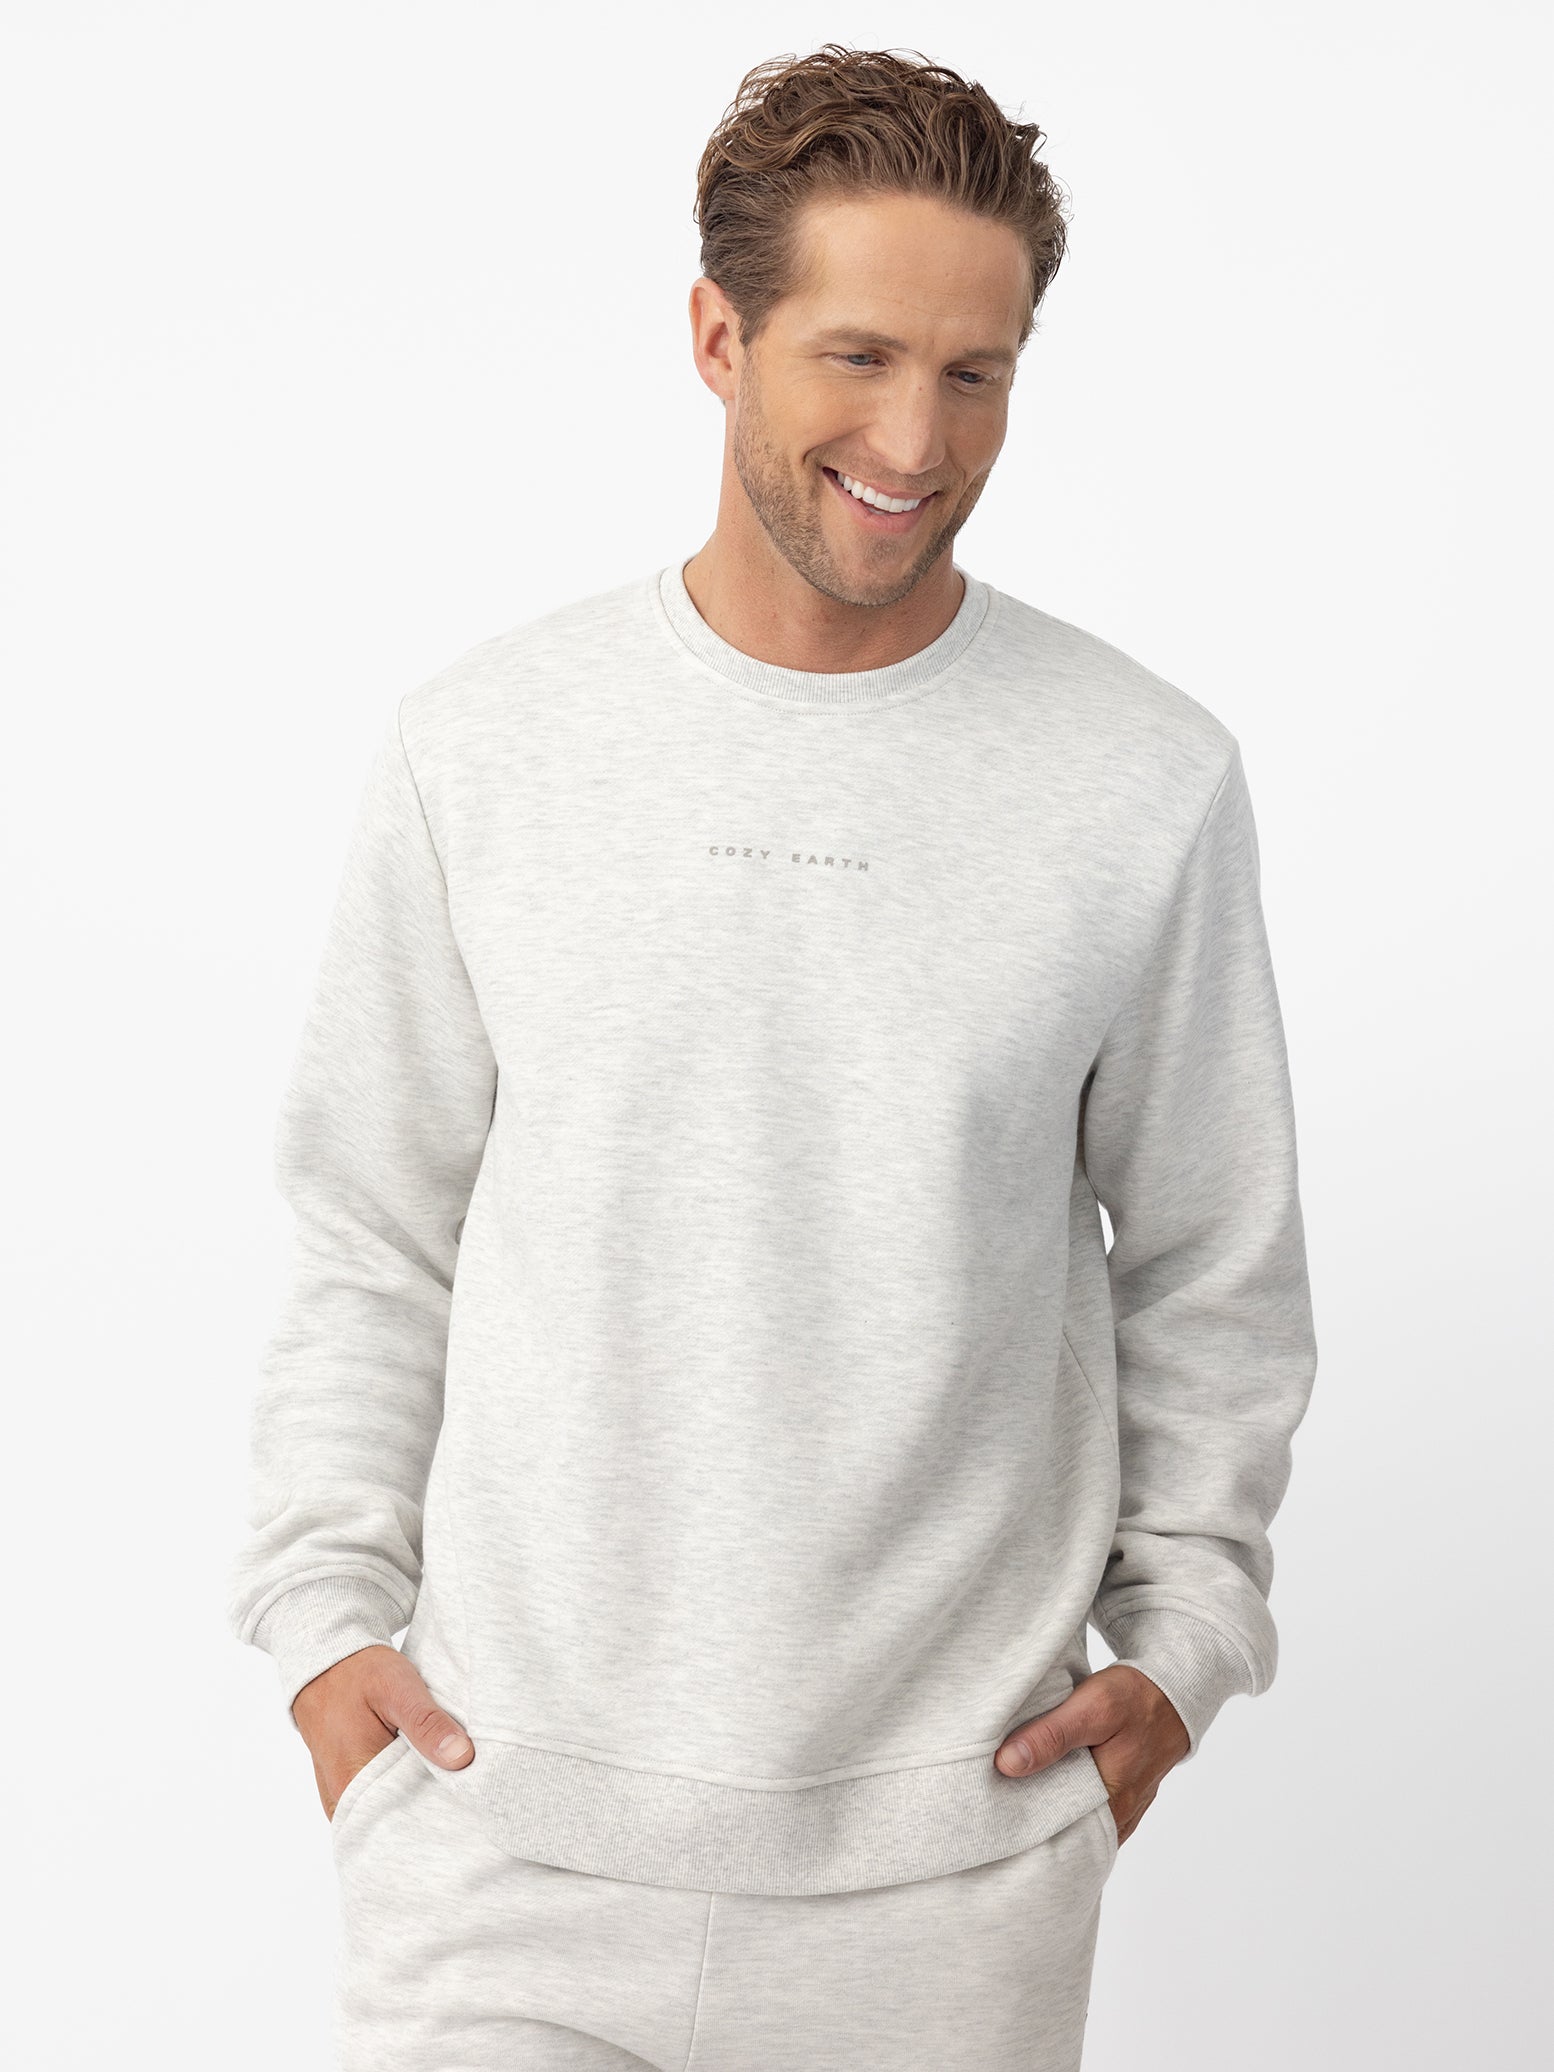 Man wearing heather grey cityscape pullover with white background |Color:Heather Grey